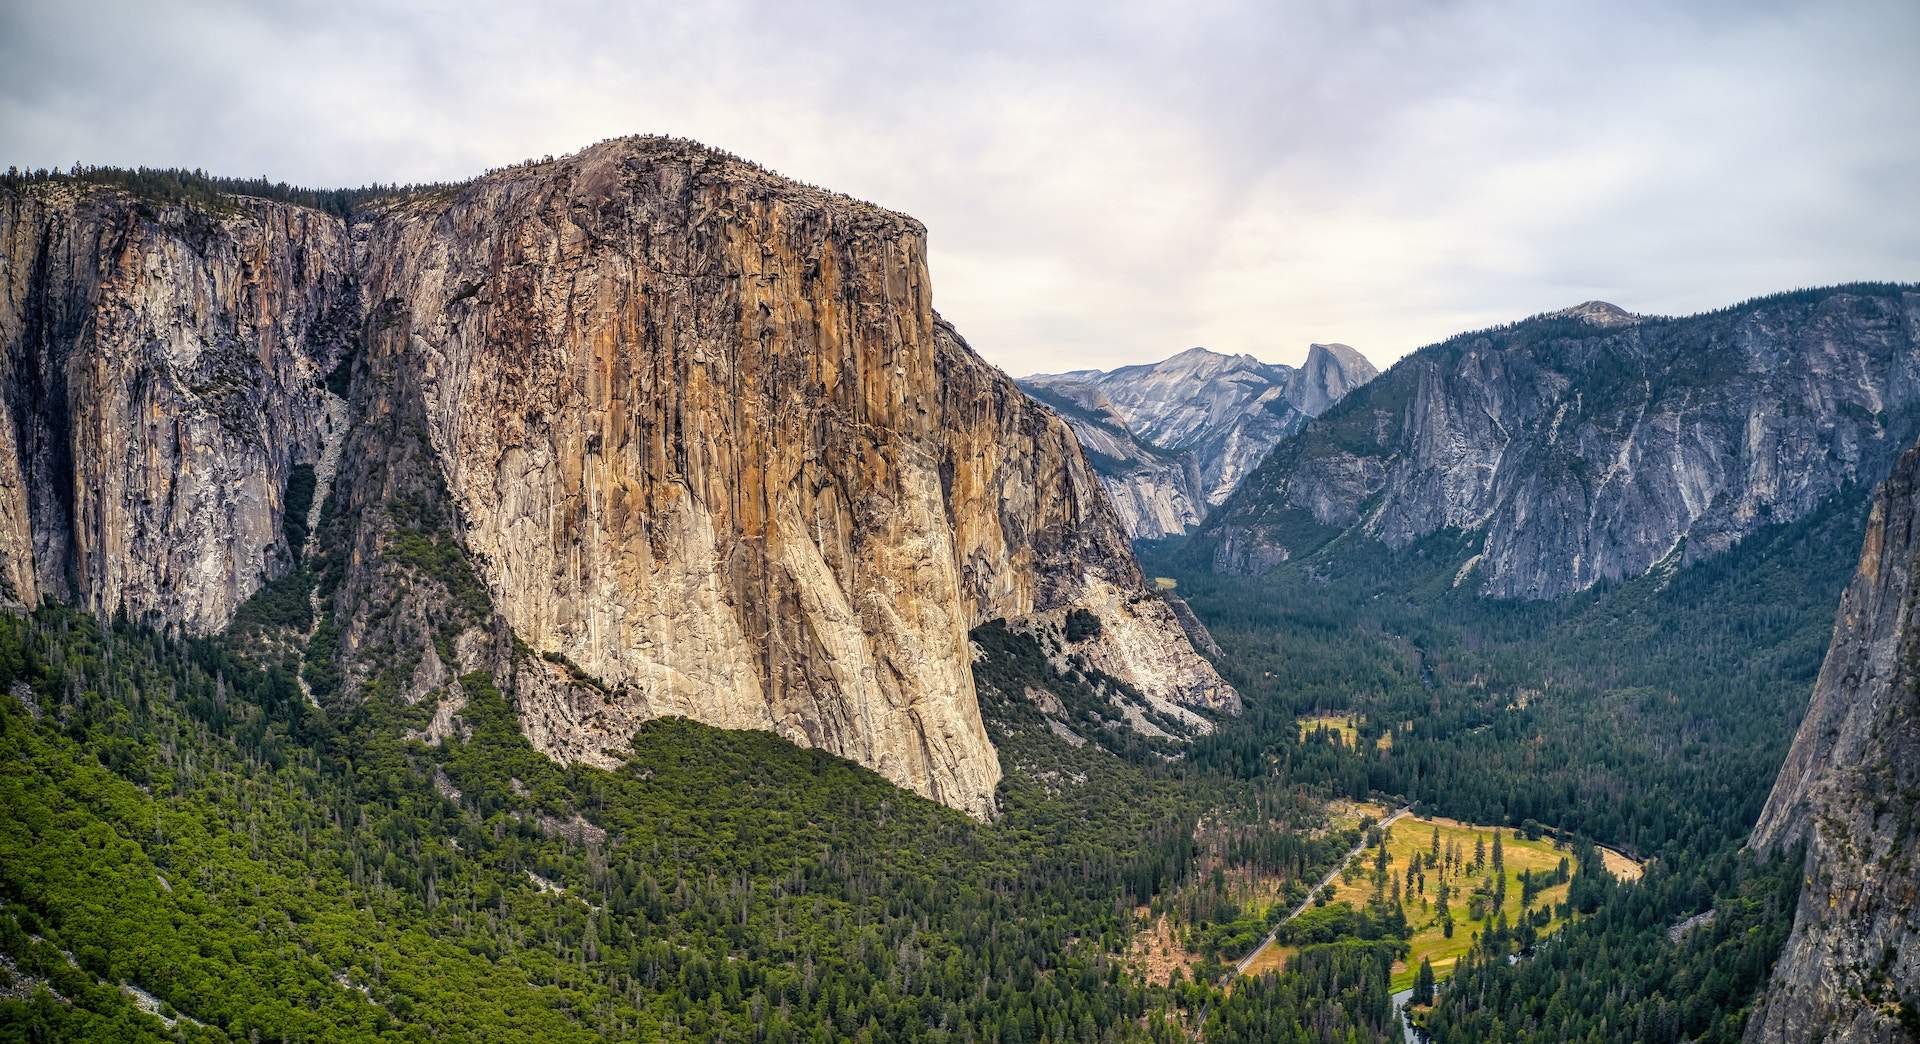 The Best Places to See El Capitan in Yosemite